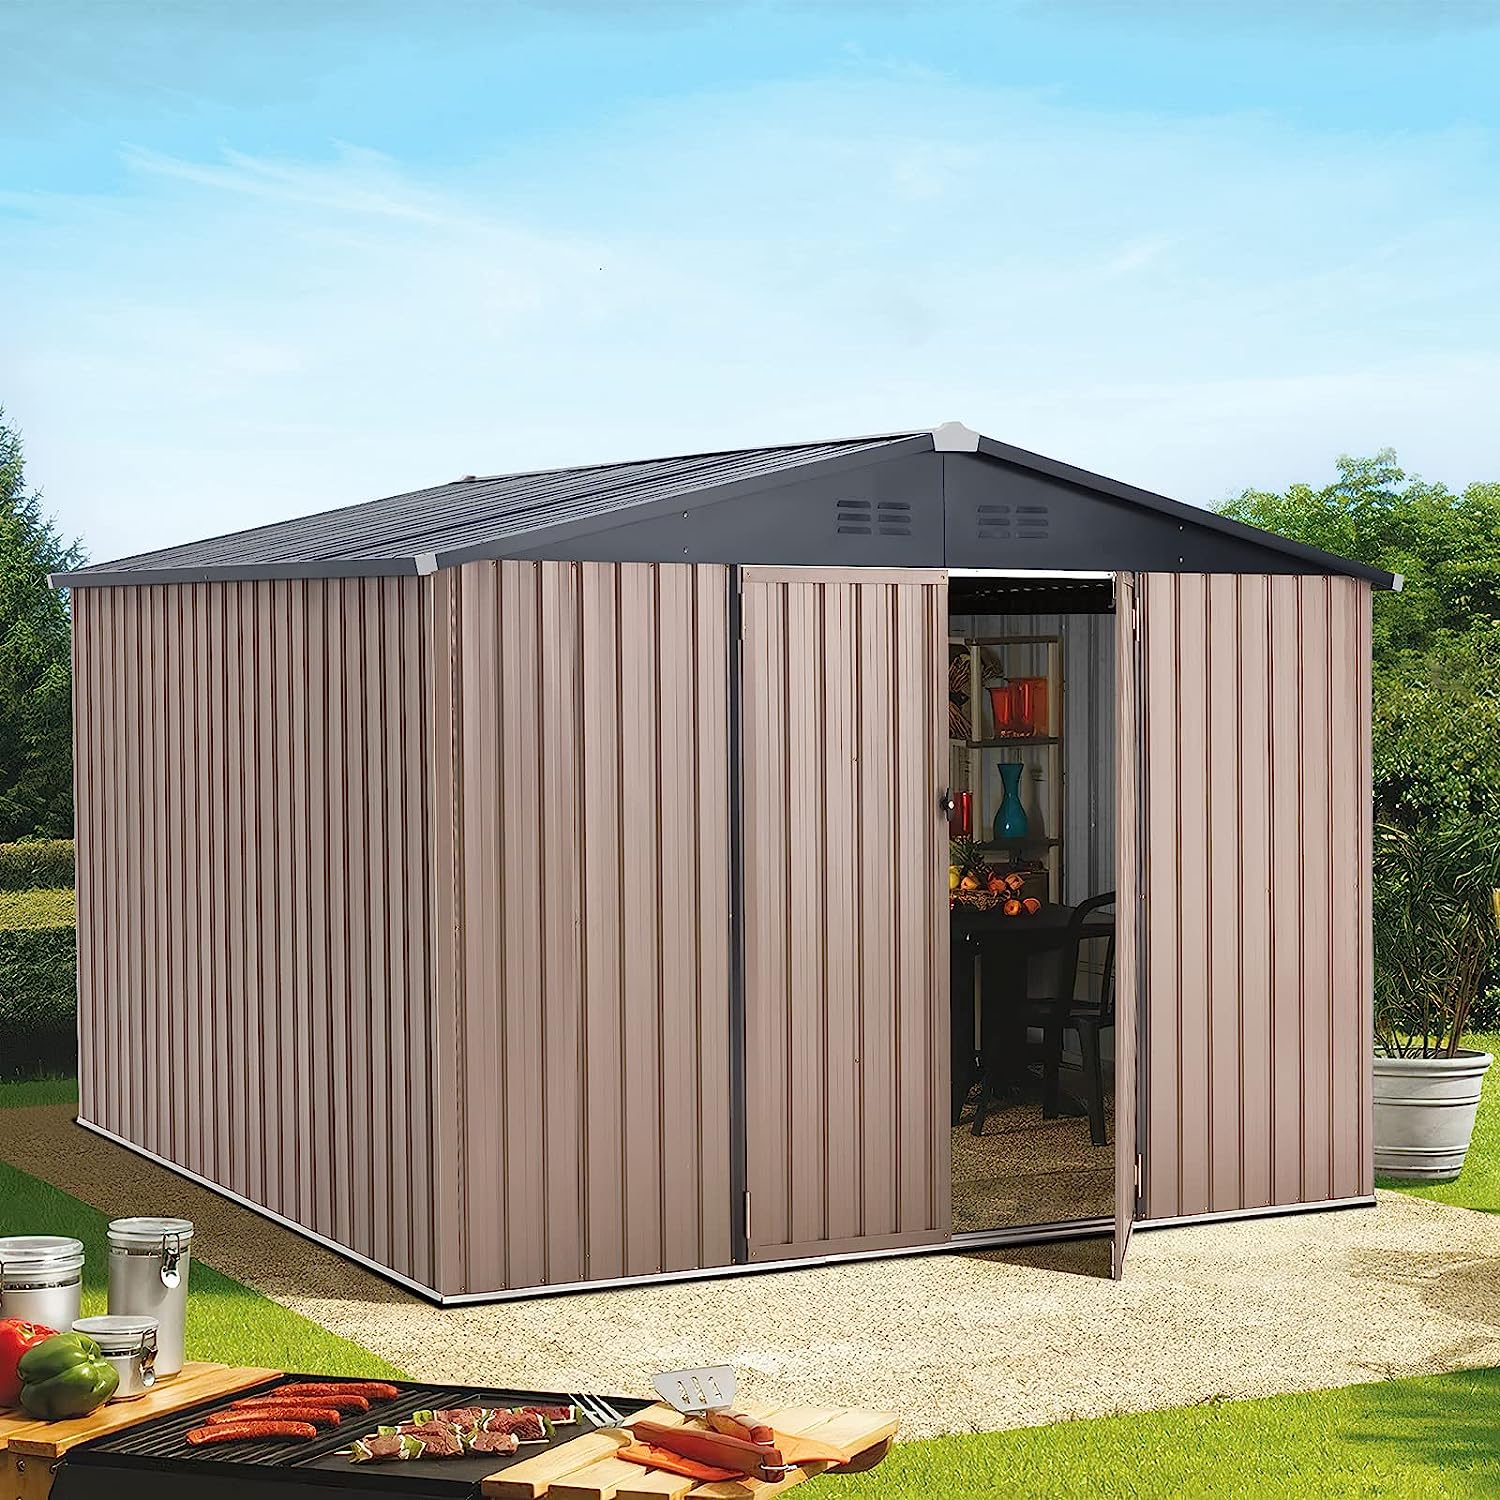 AECOJOY 8' x 10' Metal Storage Shed for Outdoor, Steel Yard Shed with Design of Lockable Doors, Utility and Tool Storage for Garden, Backyard, Patio, Outside use.